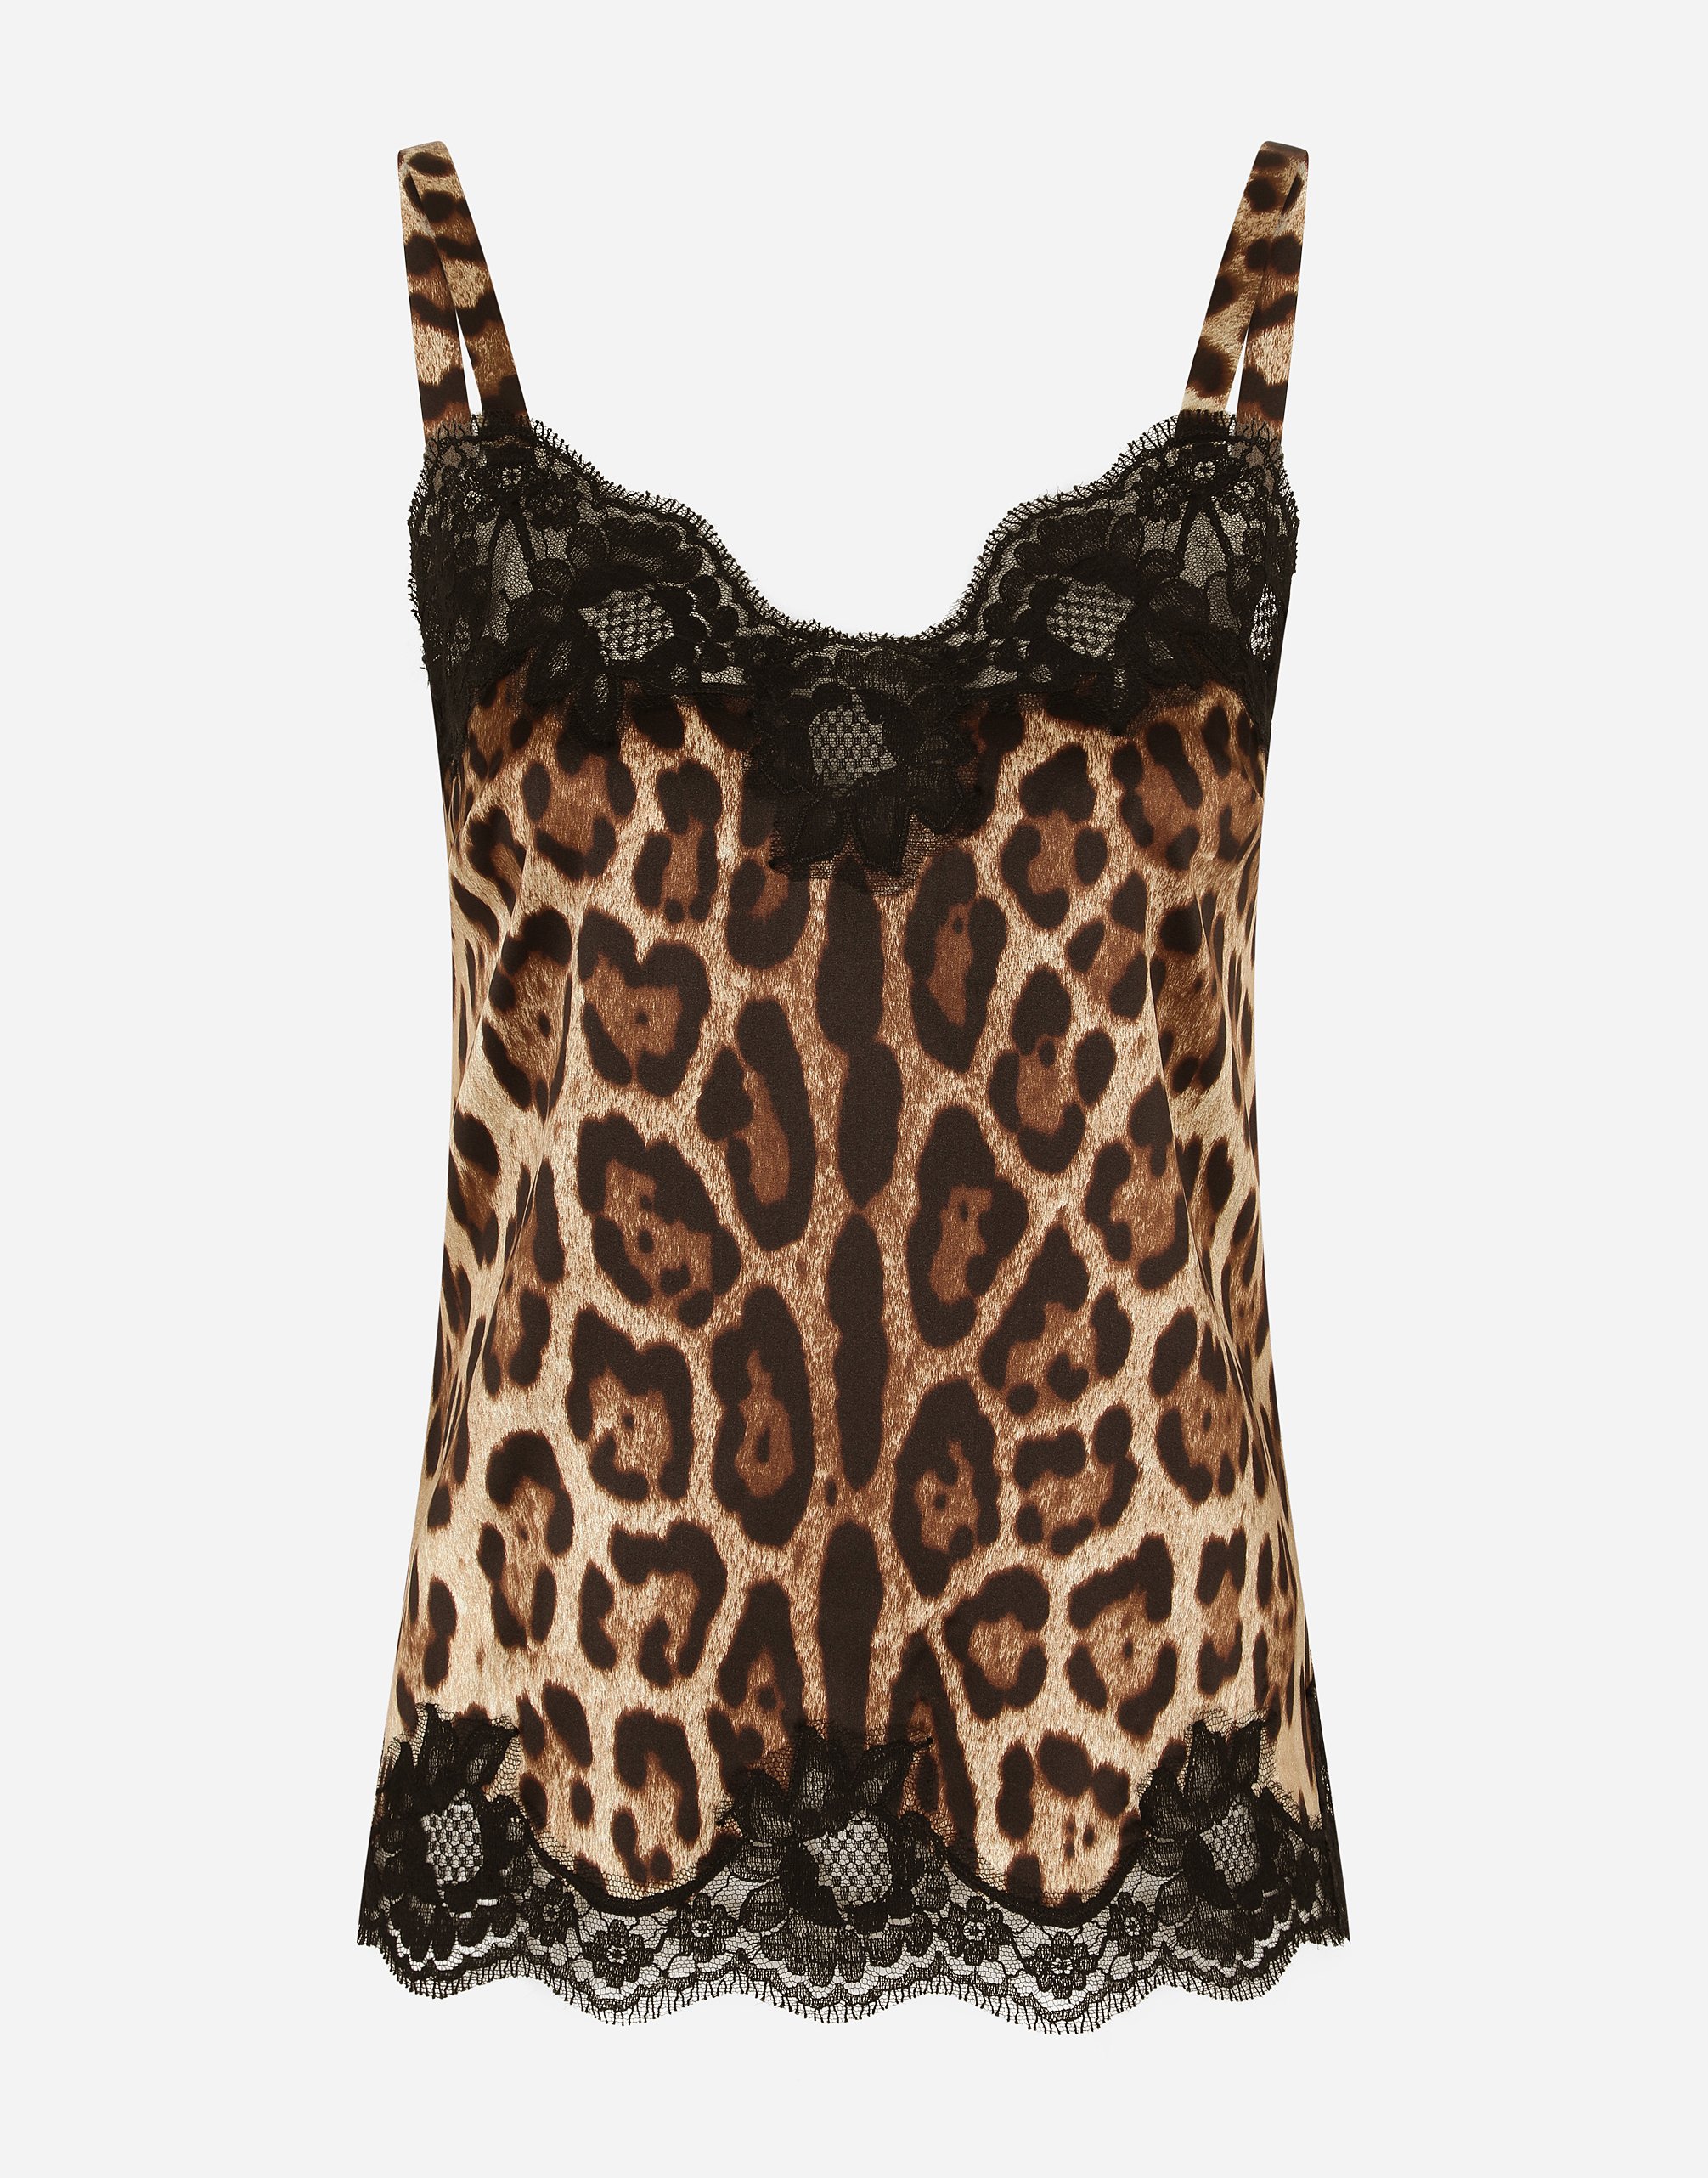 Dolce & Gabbana Leopard-print satin lingerie-style top with lace detailing